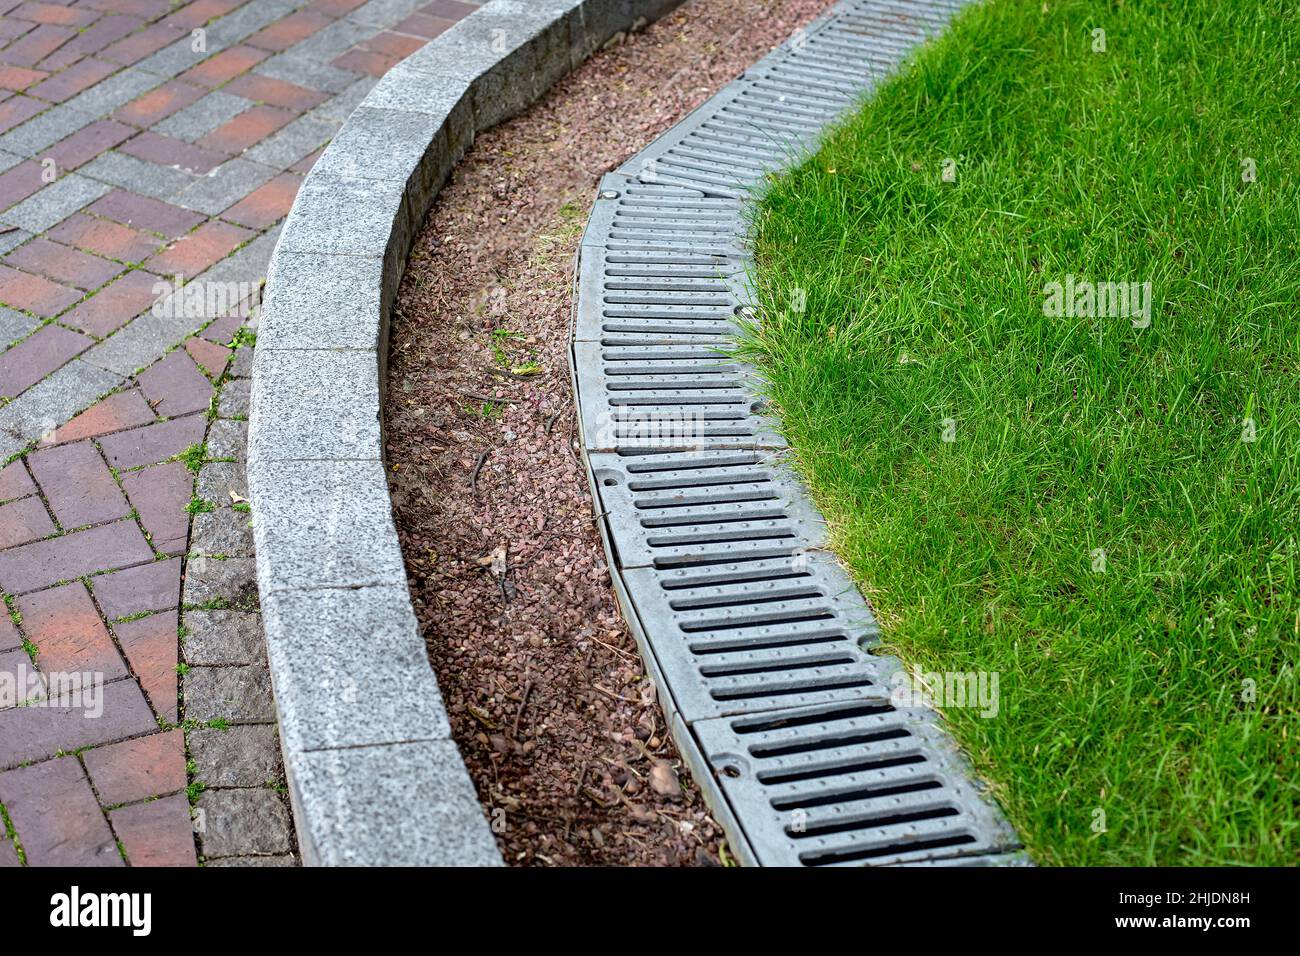 iron drainage grate on the roadside with green grass and stone pebbles at the granite curb along the pedestrian pavement of brick tiles, nobody. Stock Photo